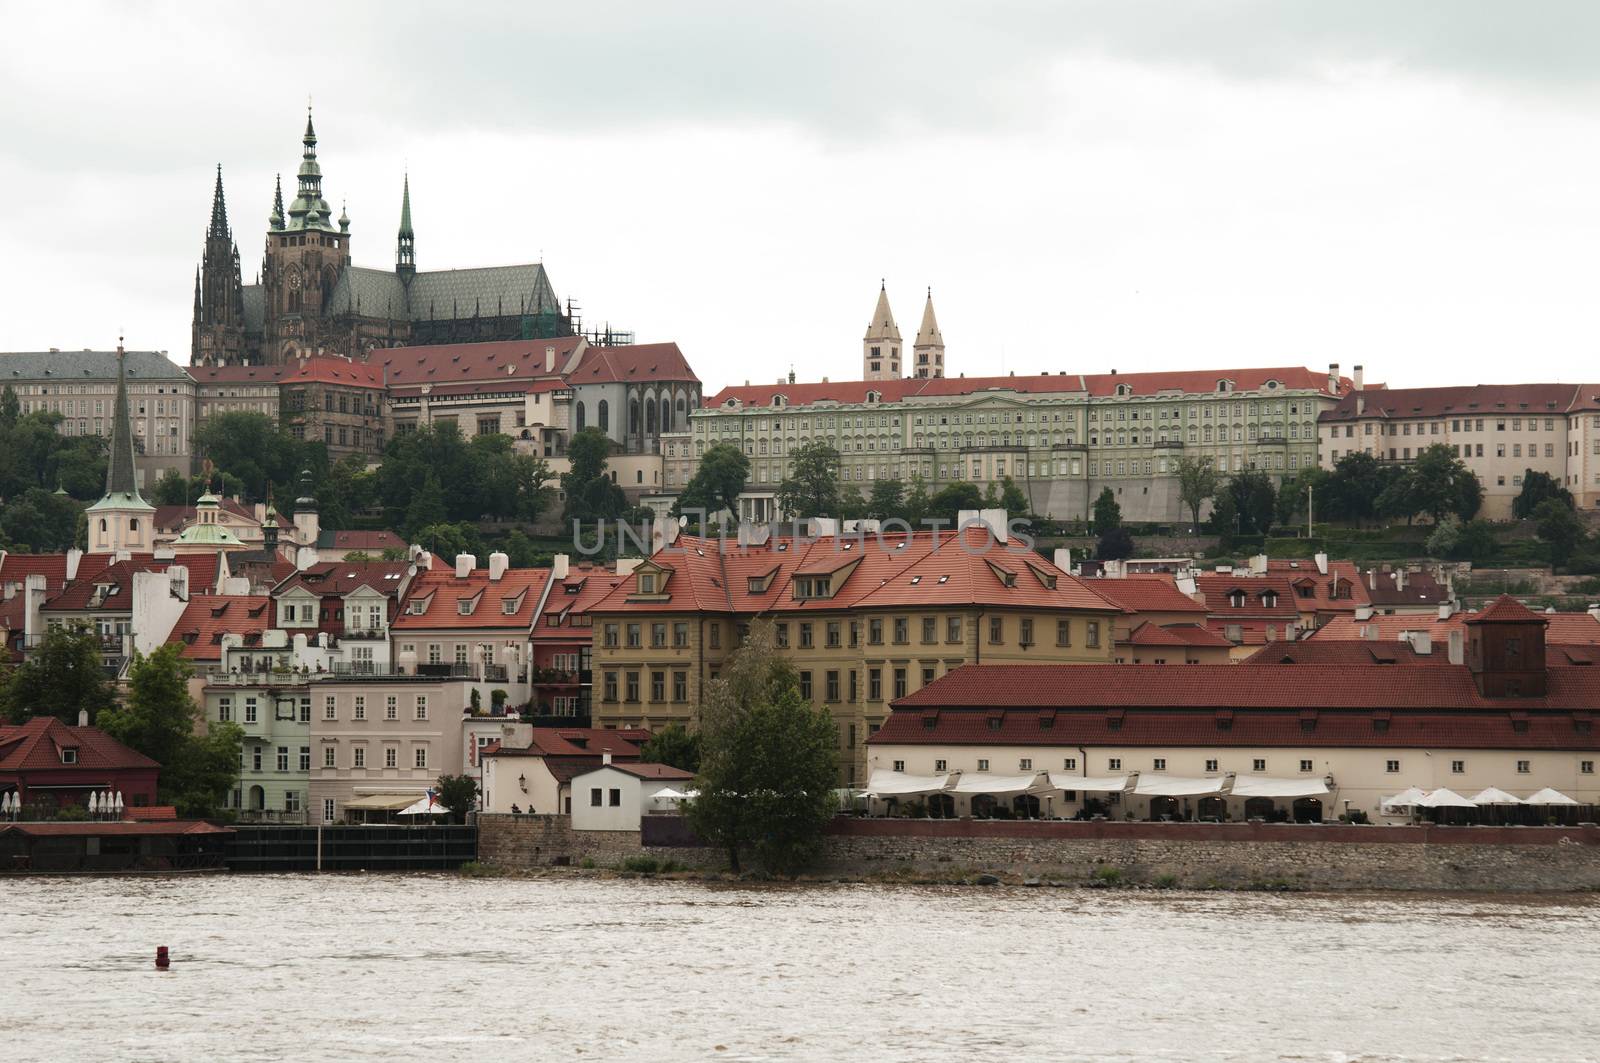 Prague Castle is a castle in Prague where the Kings of Bohemia, Holy Roman Emperors and presidents of Czechoslovakia and the Czech Republic have had their offices. The Bohemian Crown Jewels are kept within a hidden room inside it.